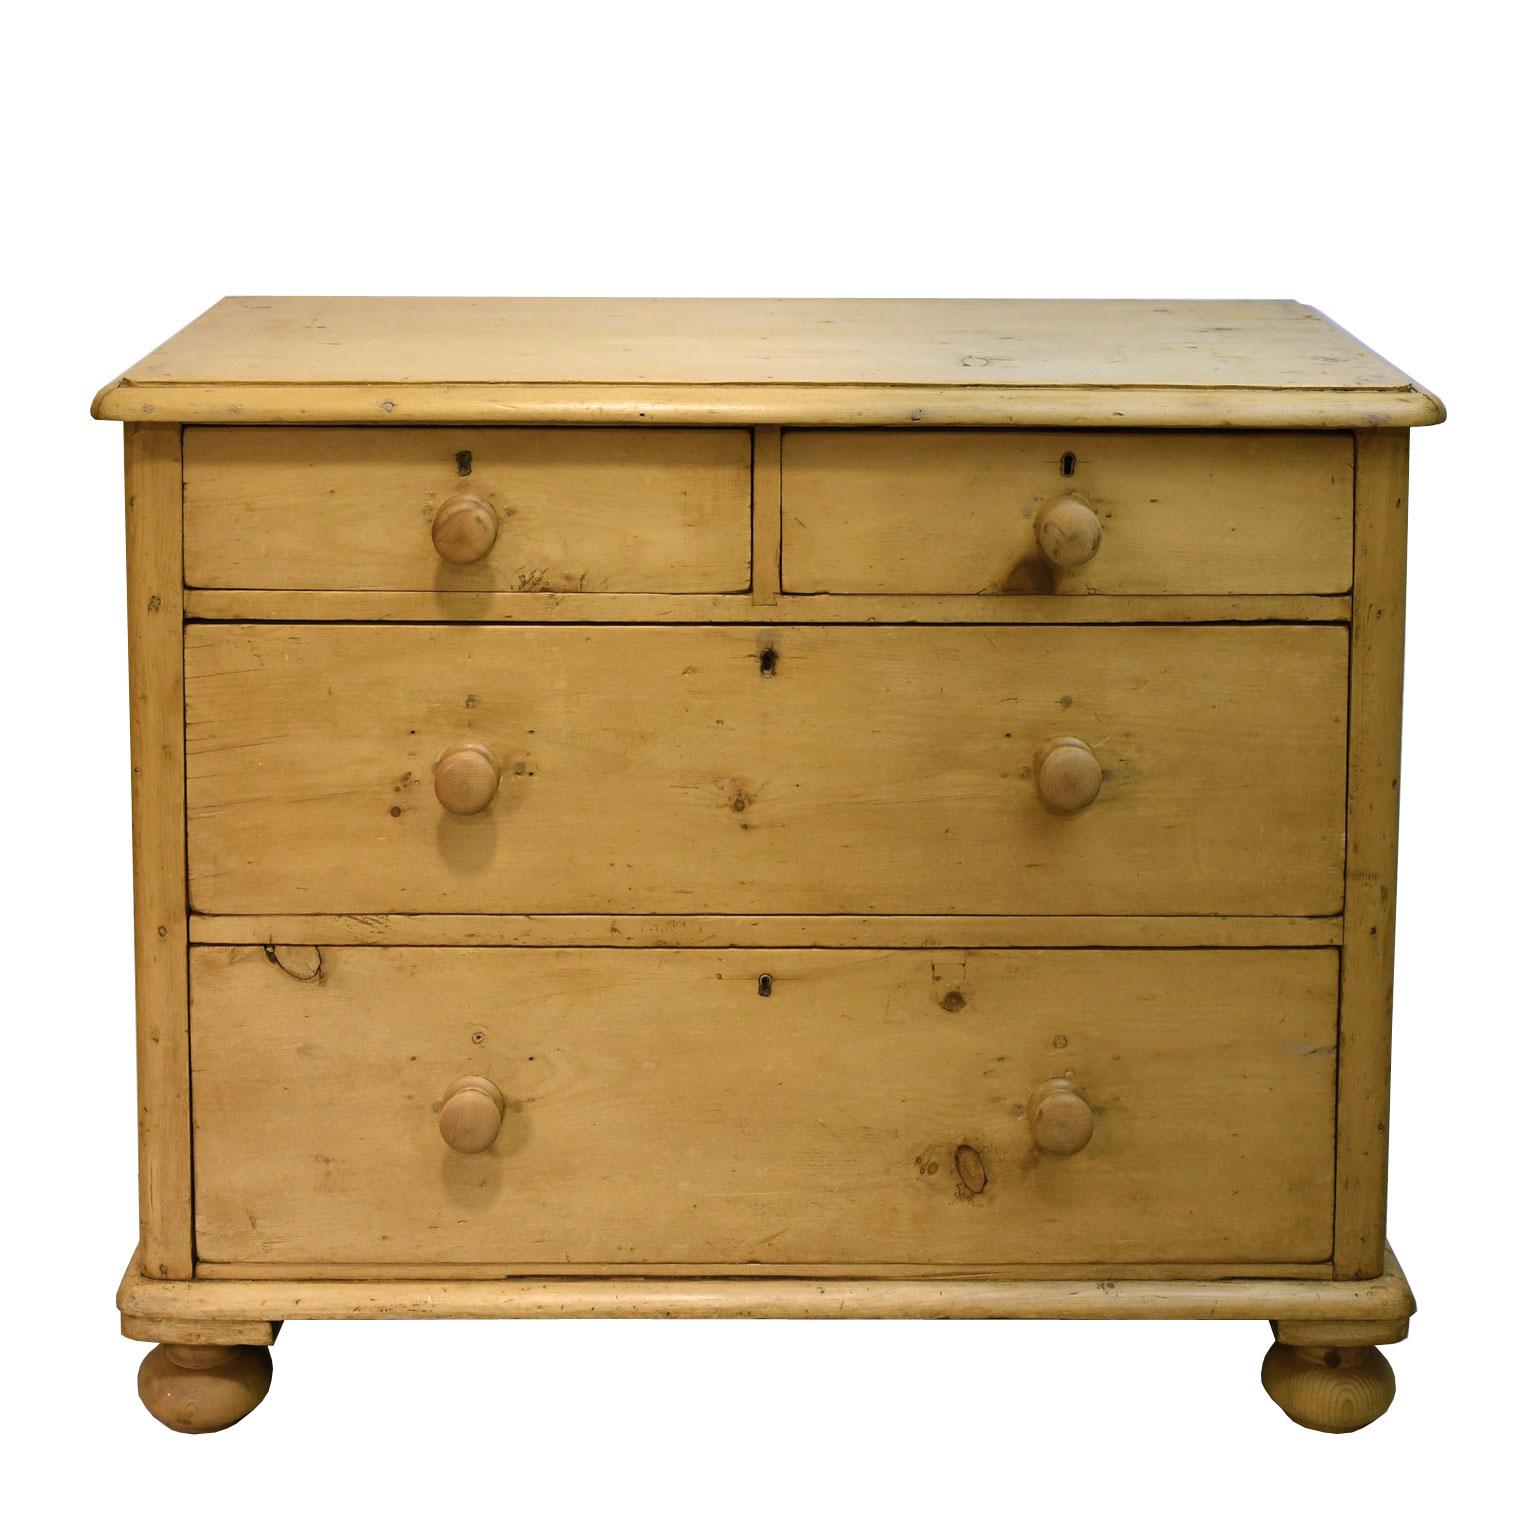 Hand-Crafted 19th Century English Country Chest of Drawers in Pine